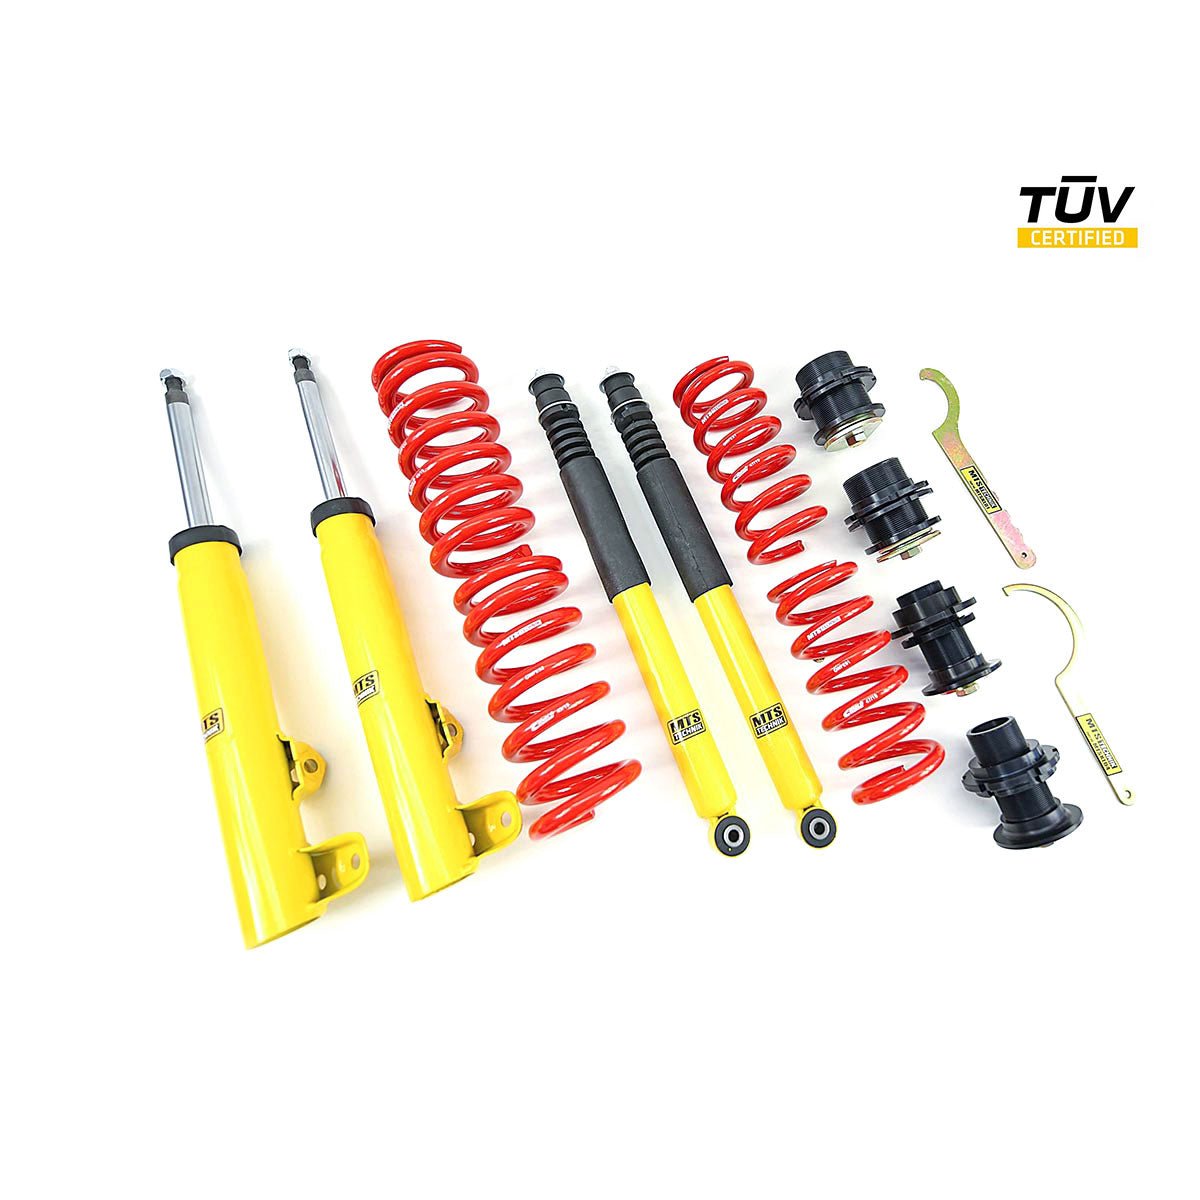 MTS TECHNIK coilover kit STREET Mercedes-Benz W124 (with TÜV) - PARTS33 GmbH